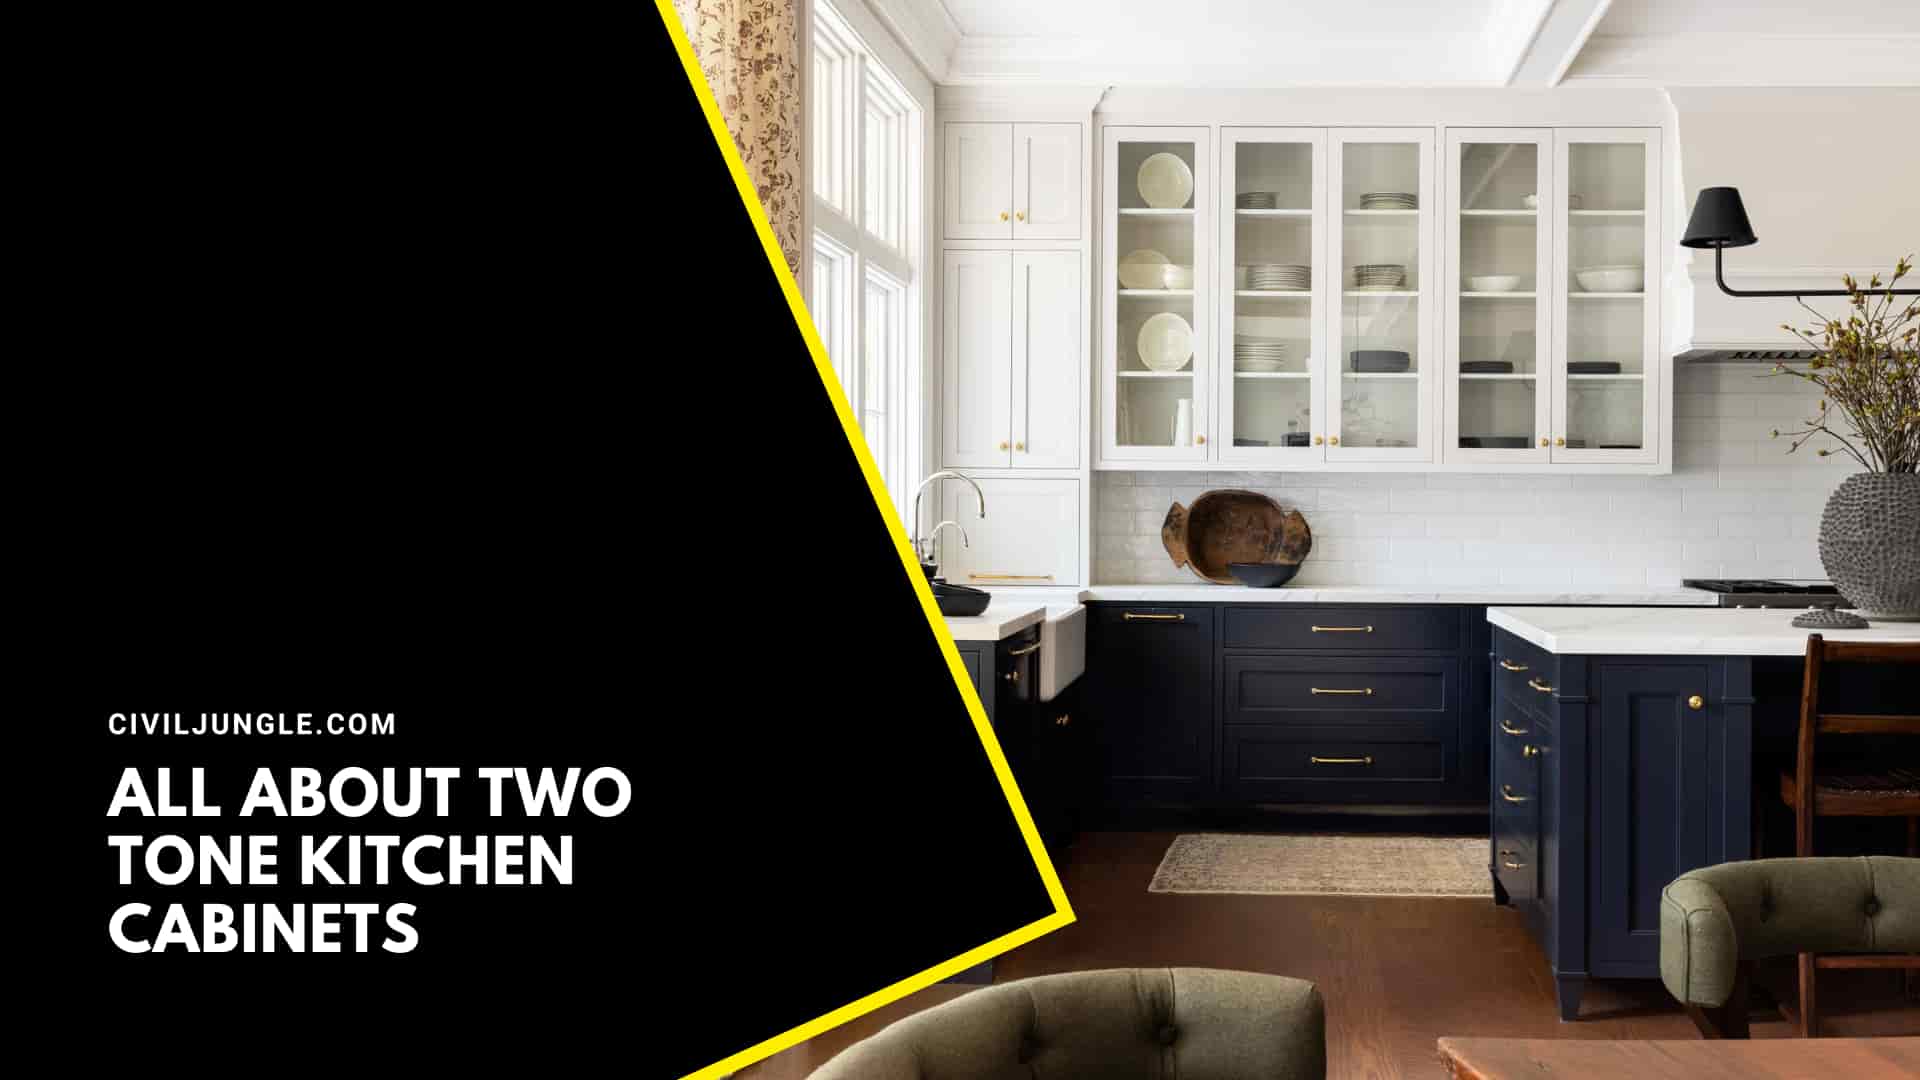 All About Two Tone Kitchen Cabinets